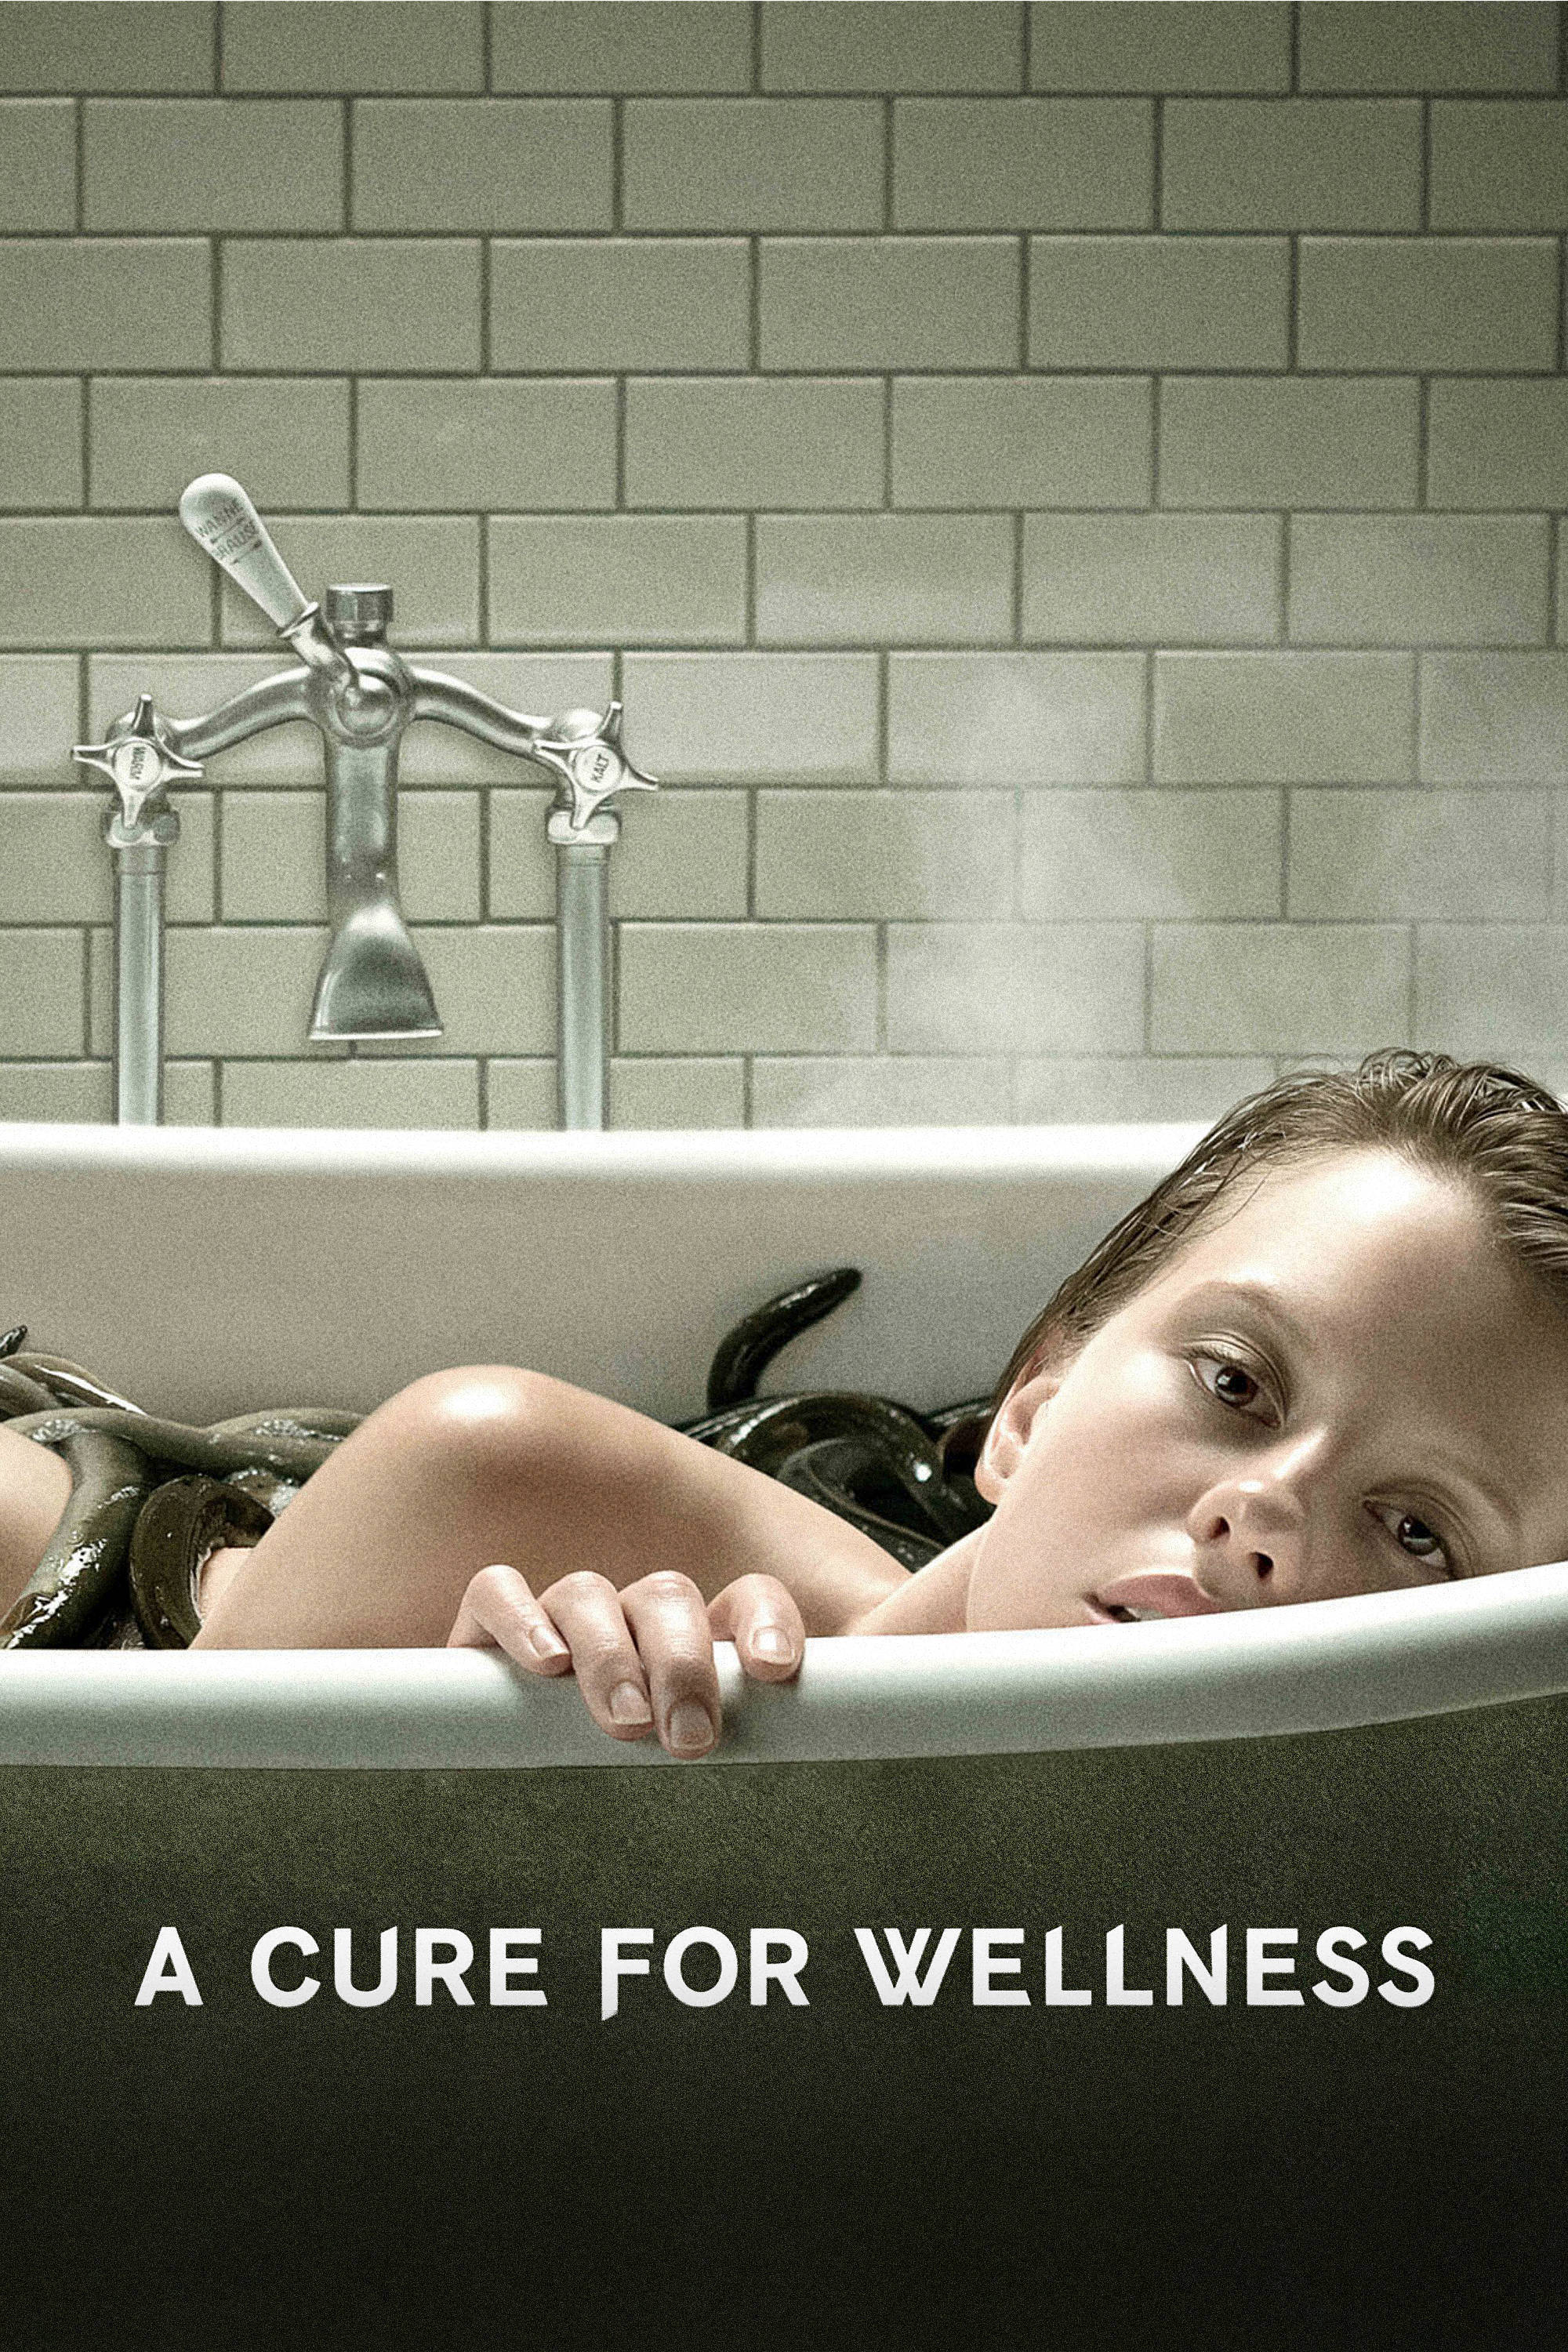 This is a poster for A Cure for Wellness.